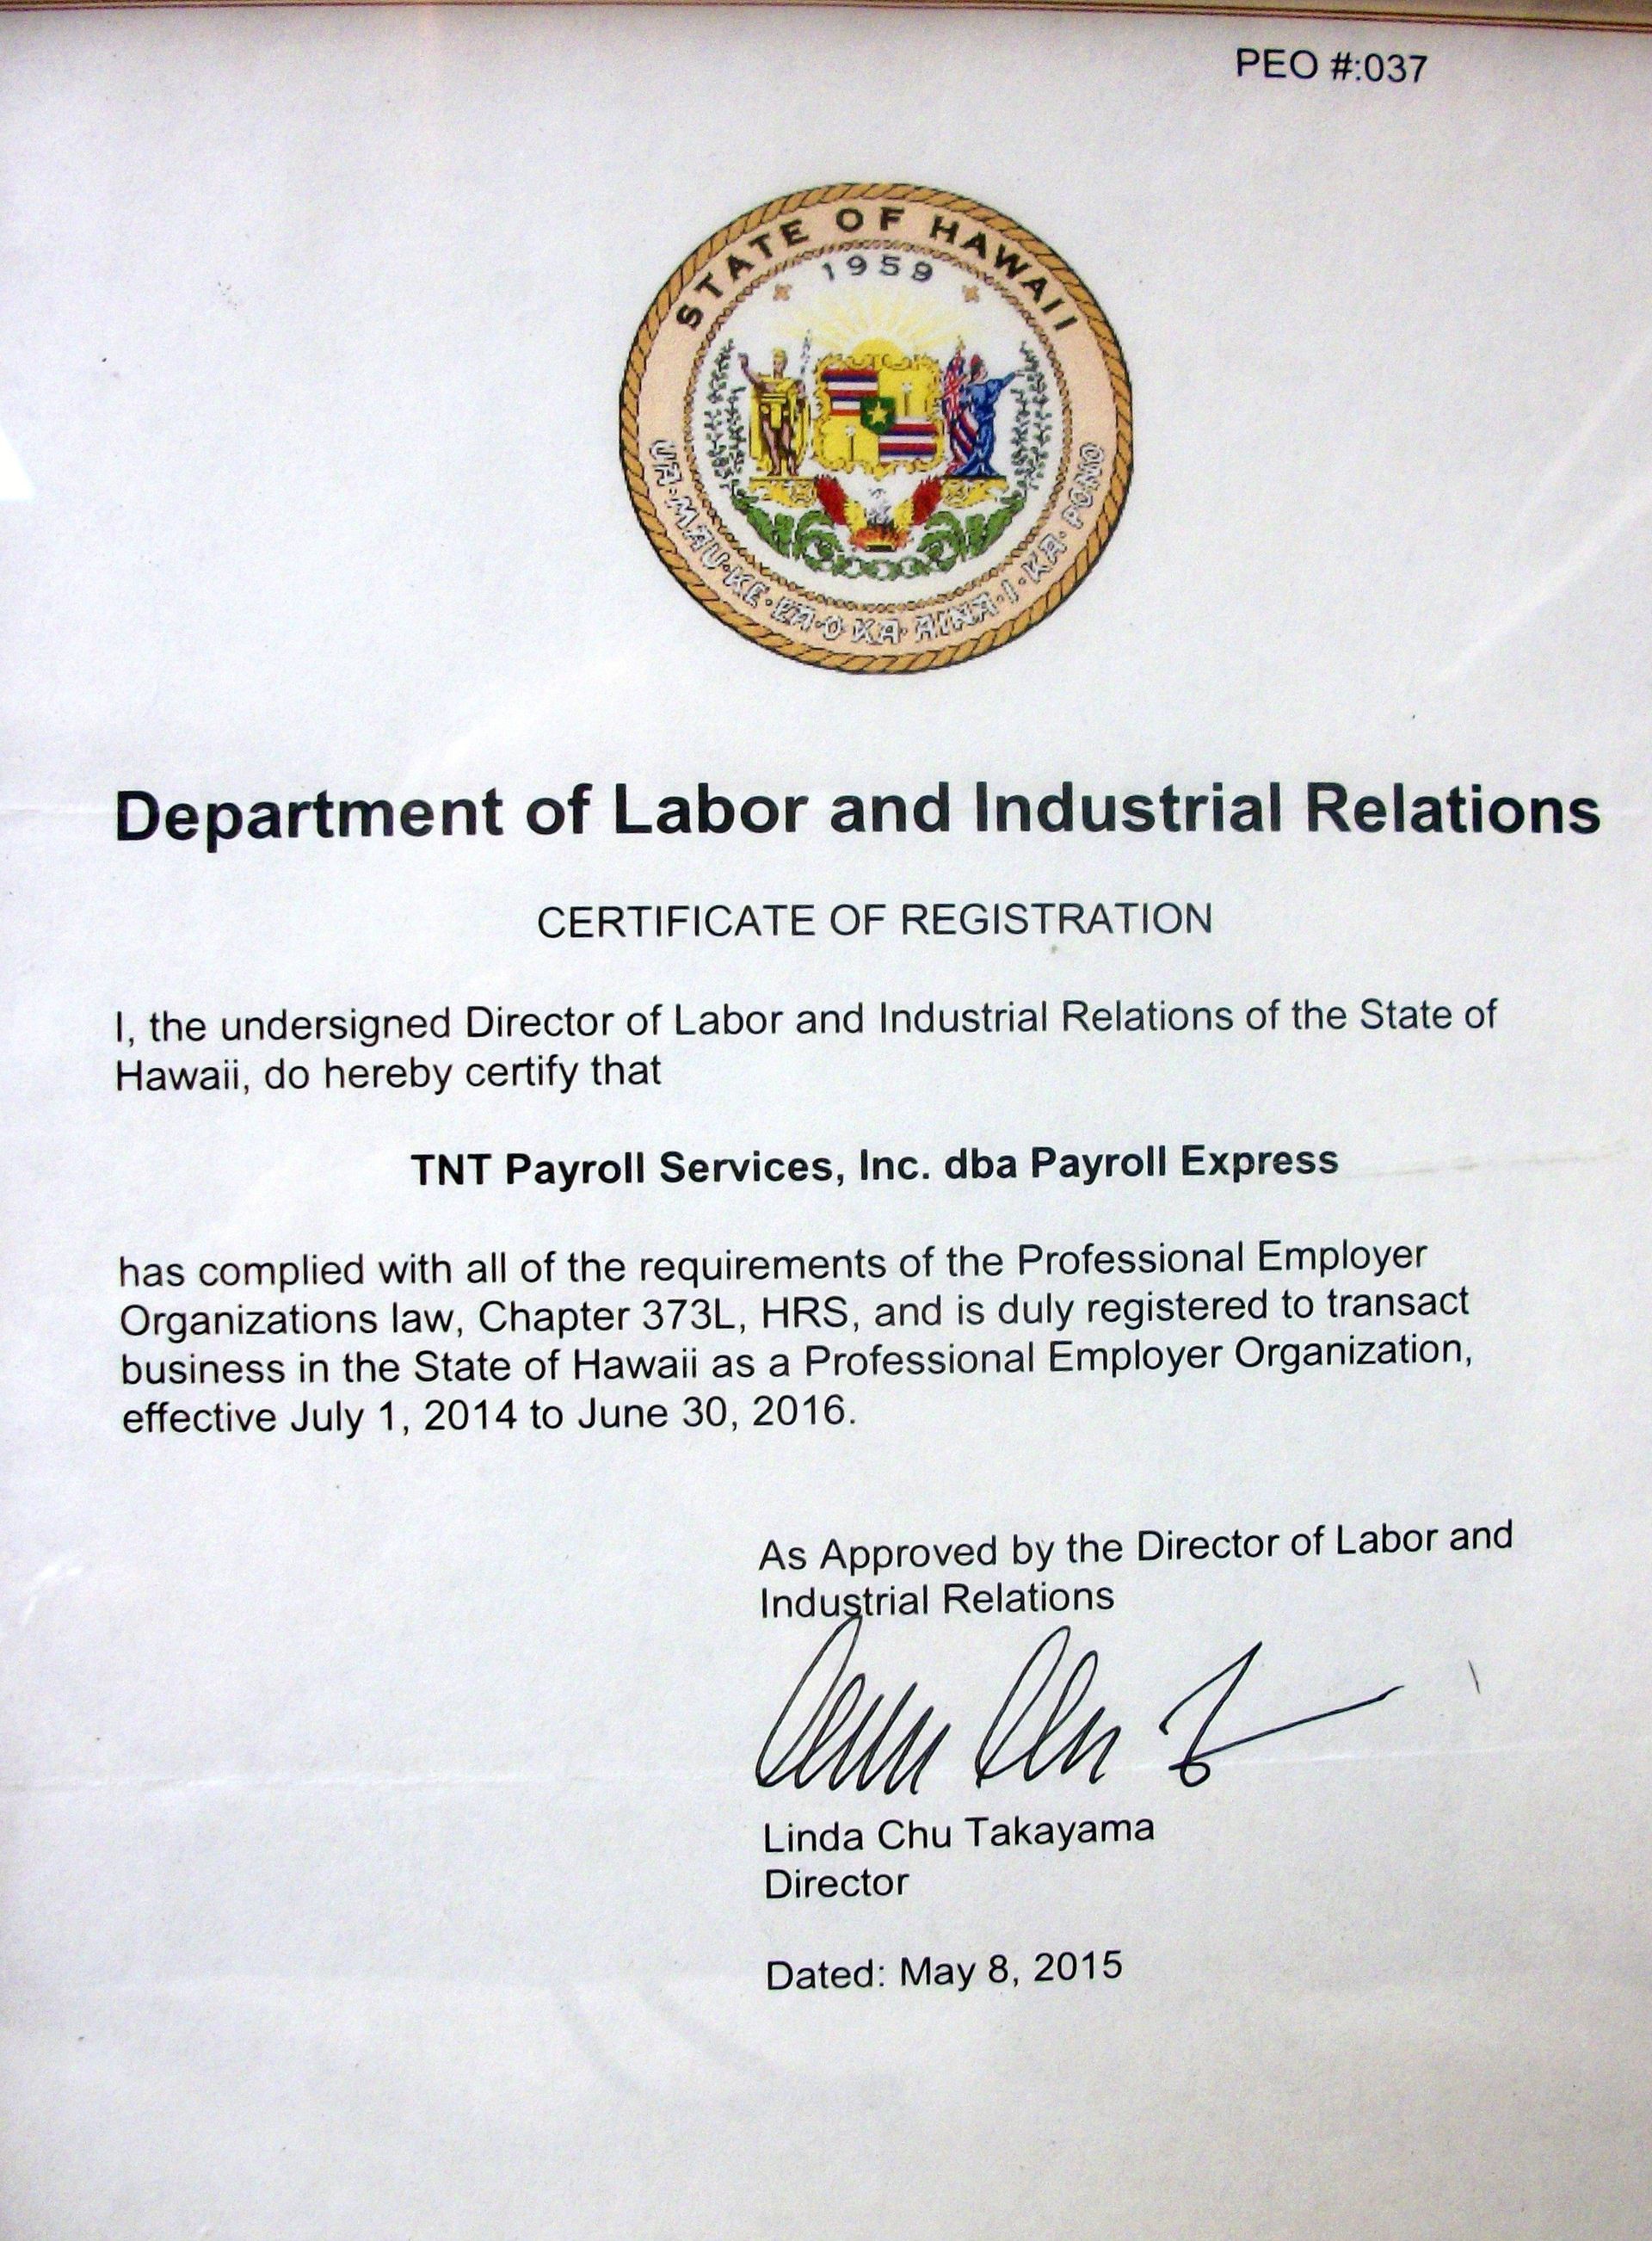 TNT Payroll Services certification of registration by state of Hawaii